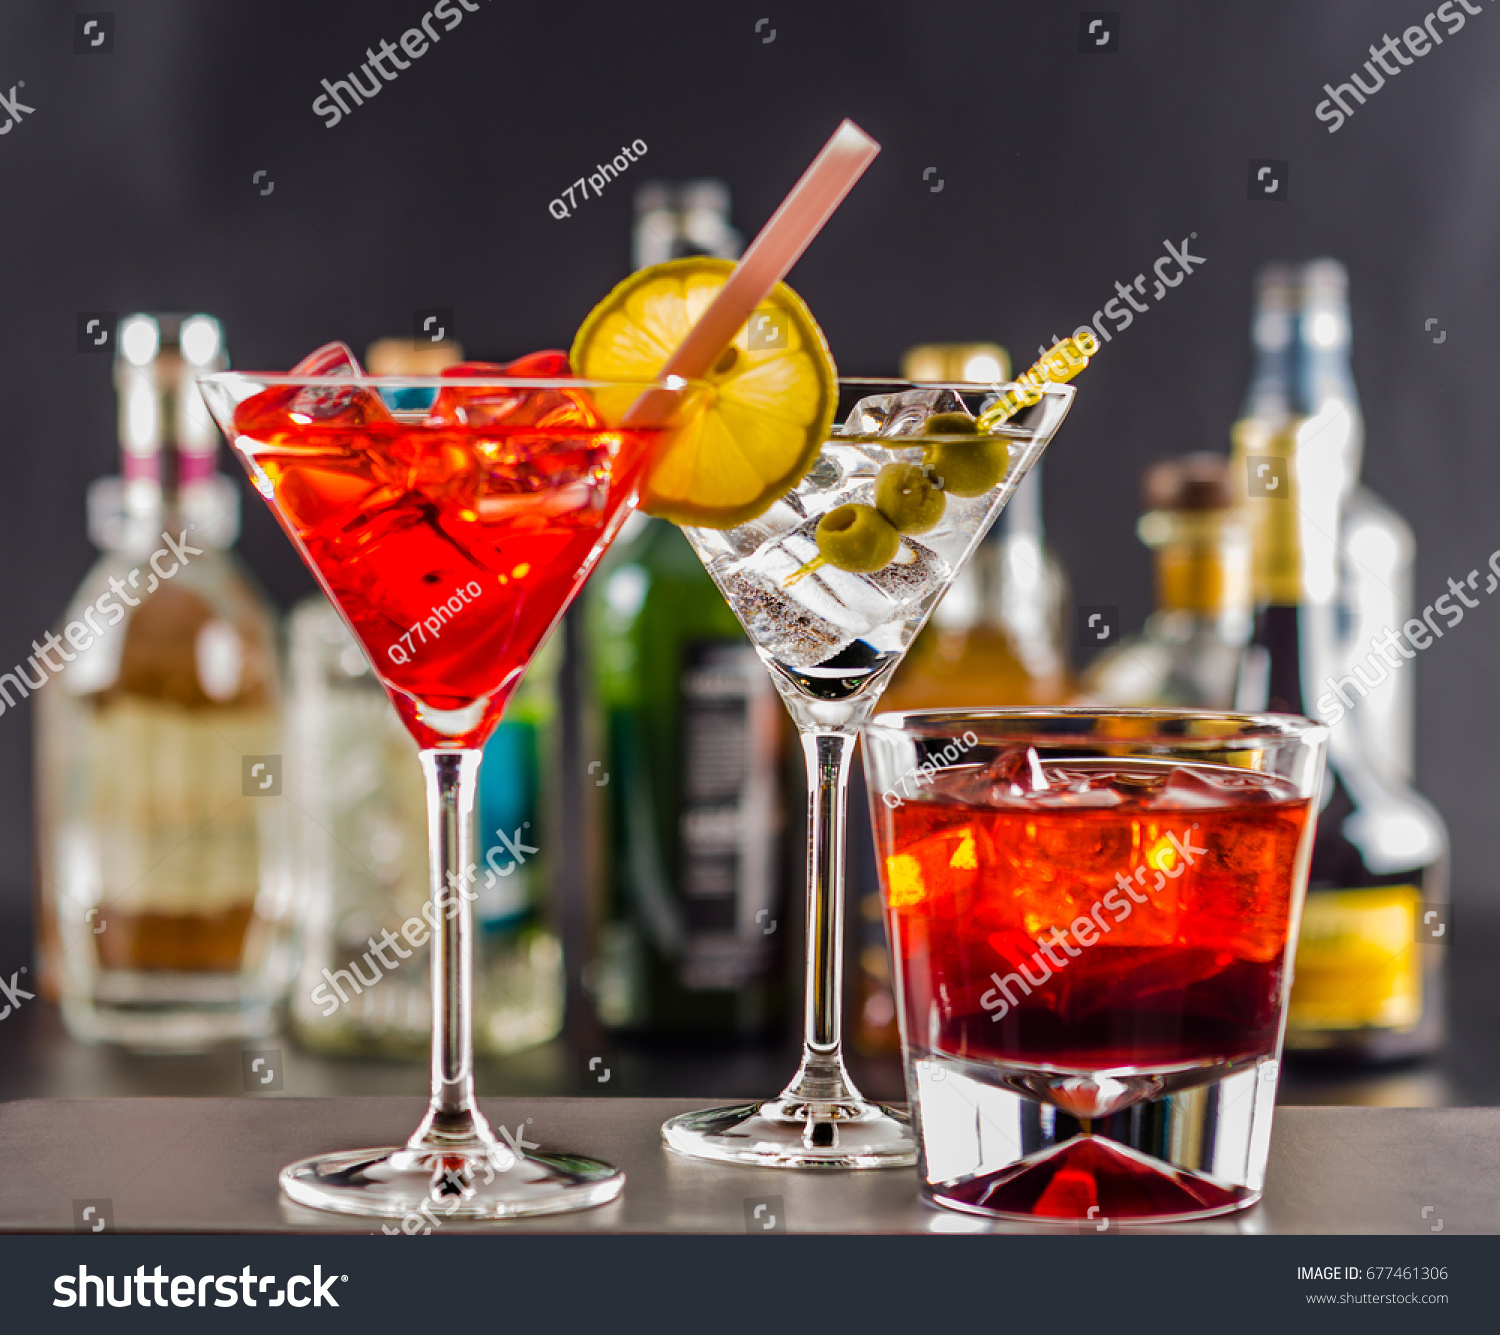 Colorful drink on the background of bottles in original shapes, cocktail drink with ice cubes, party night #677461306